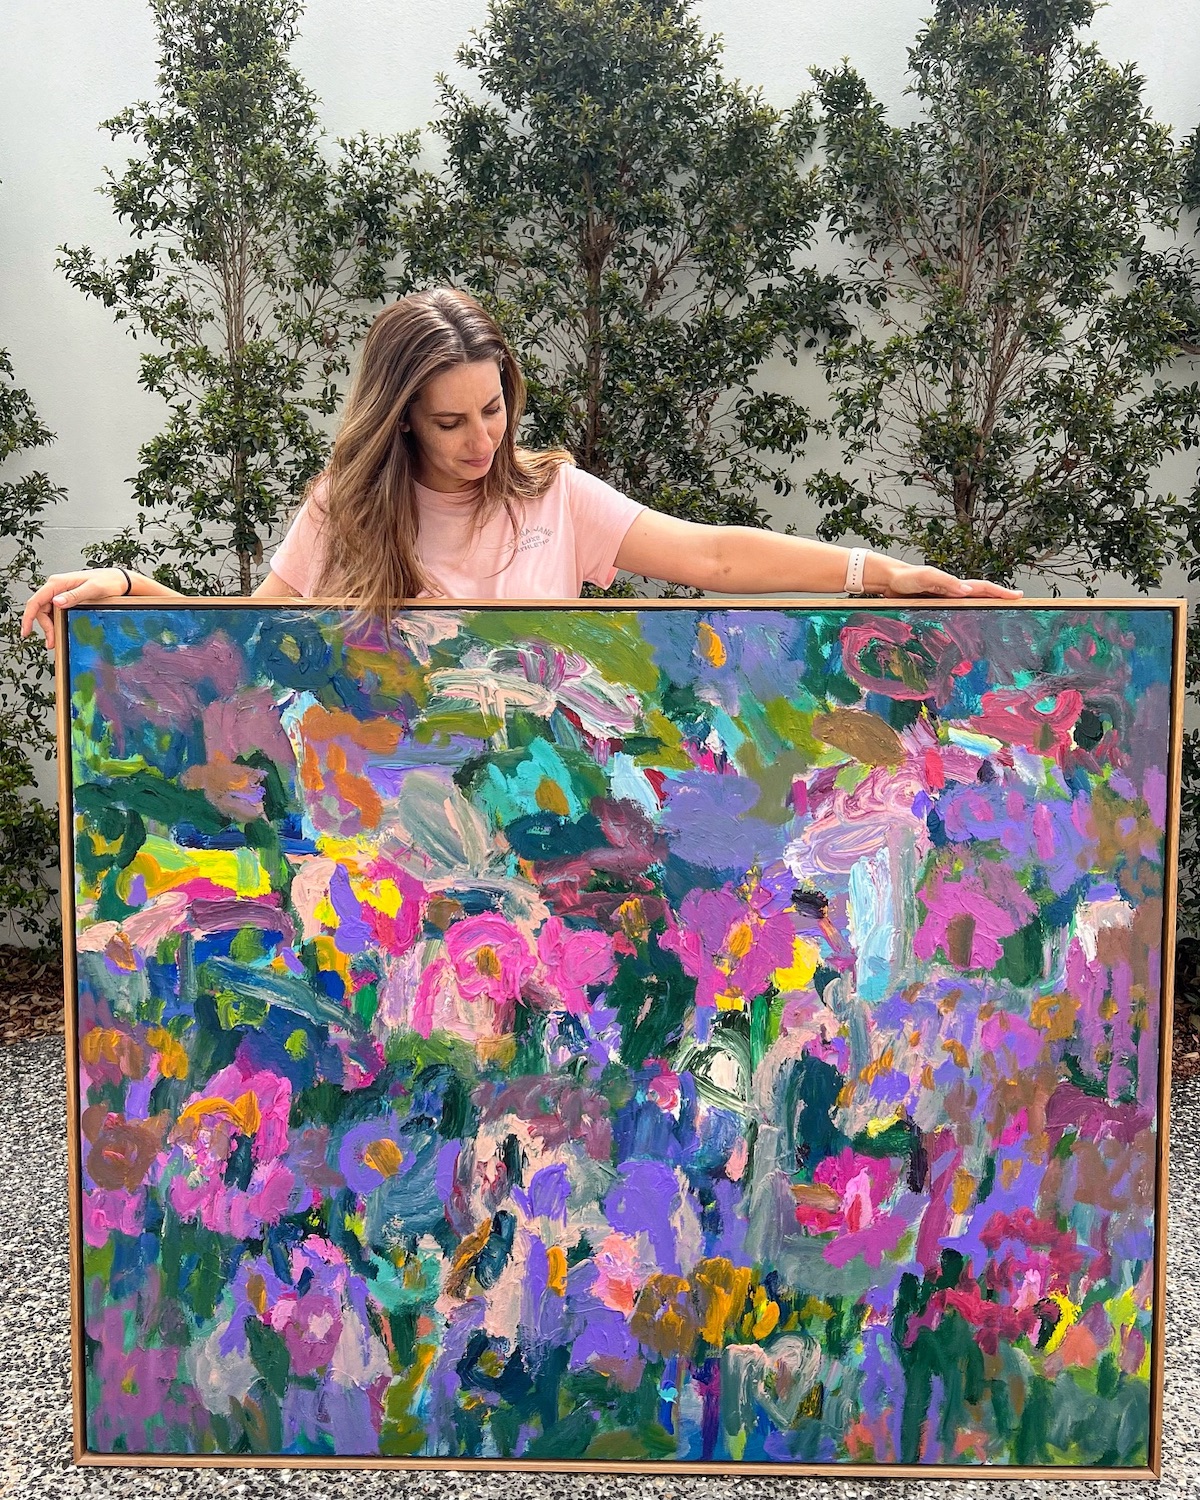 Adele Bevacqua with large floral field artwork